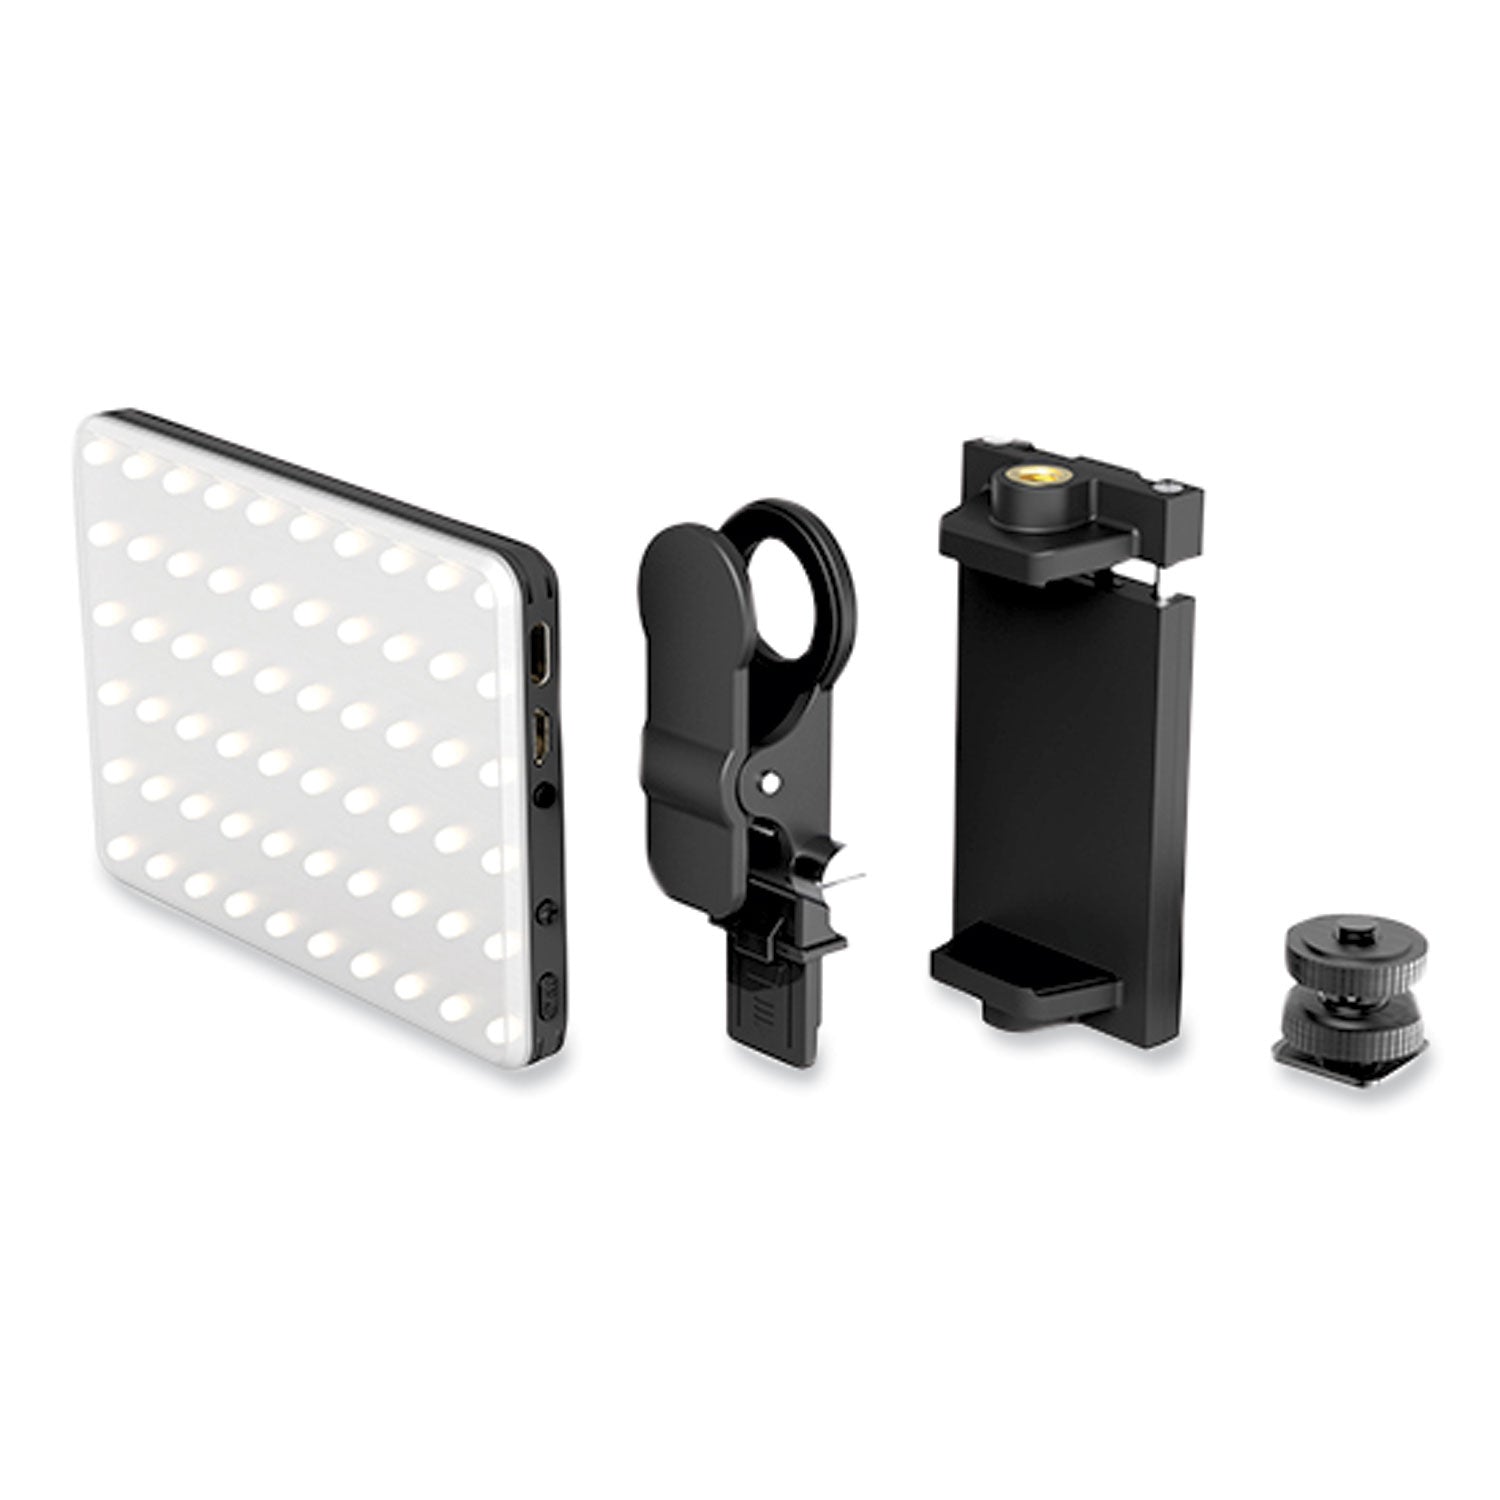 the-influencer-compact-video-light-black_dpwl60 - 1